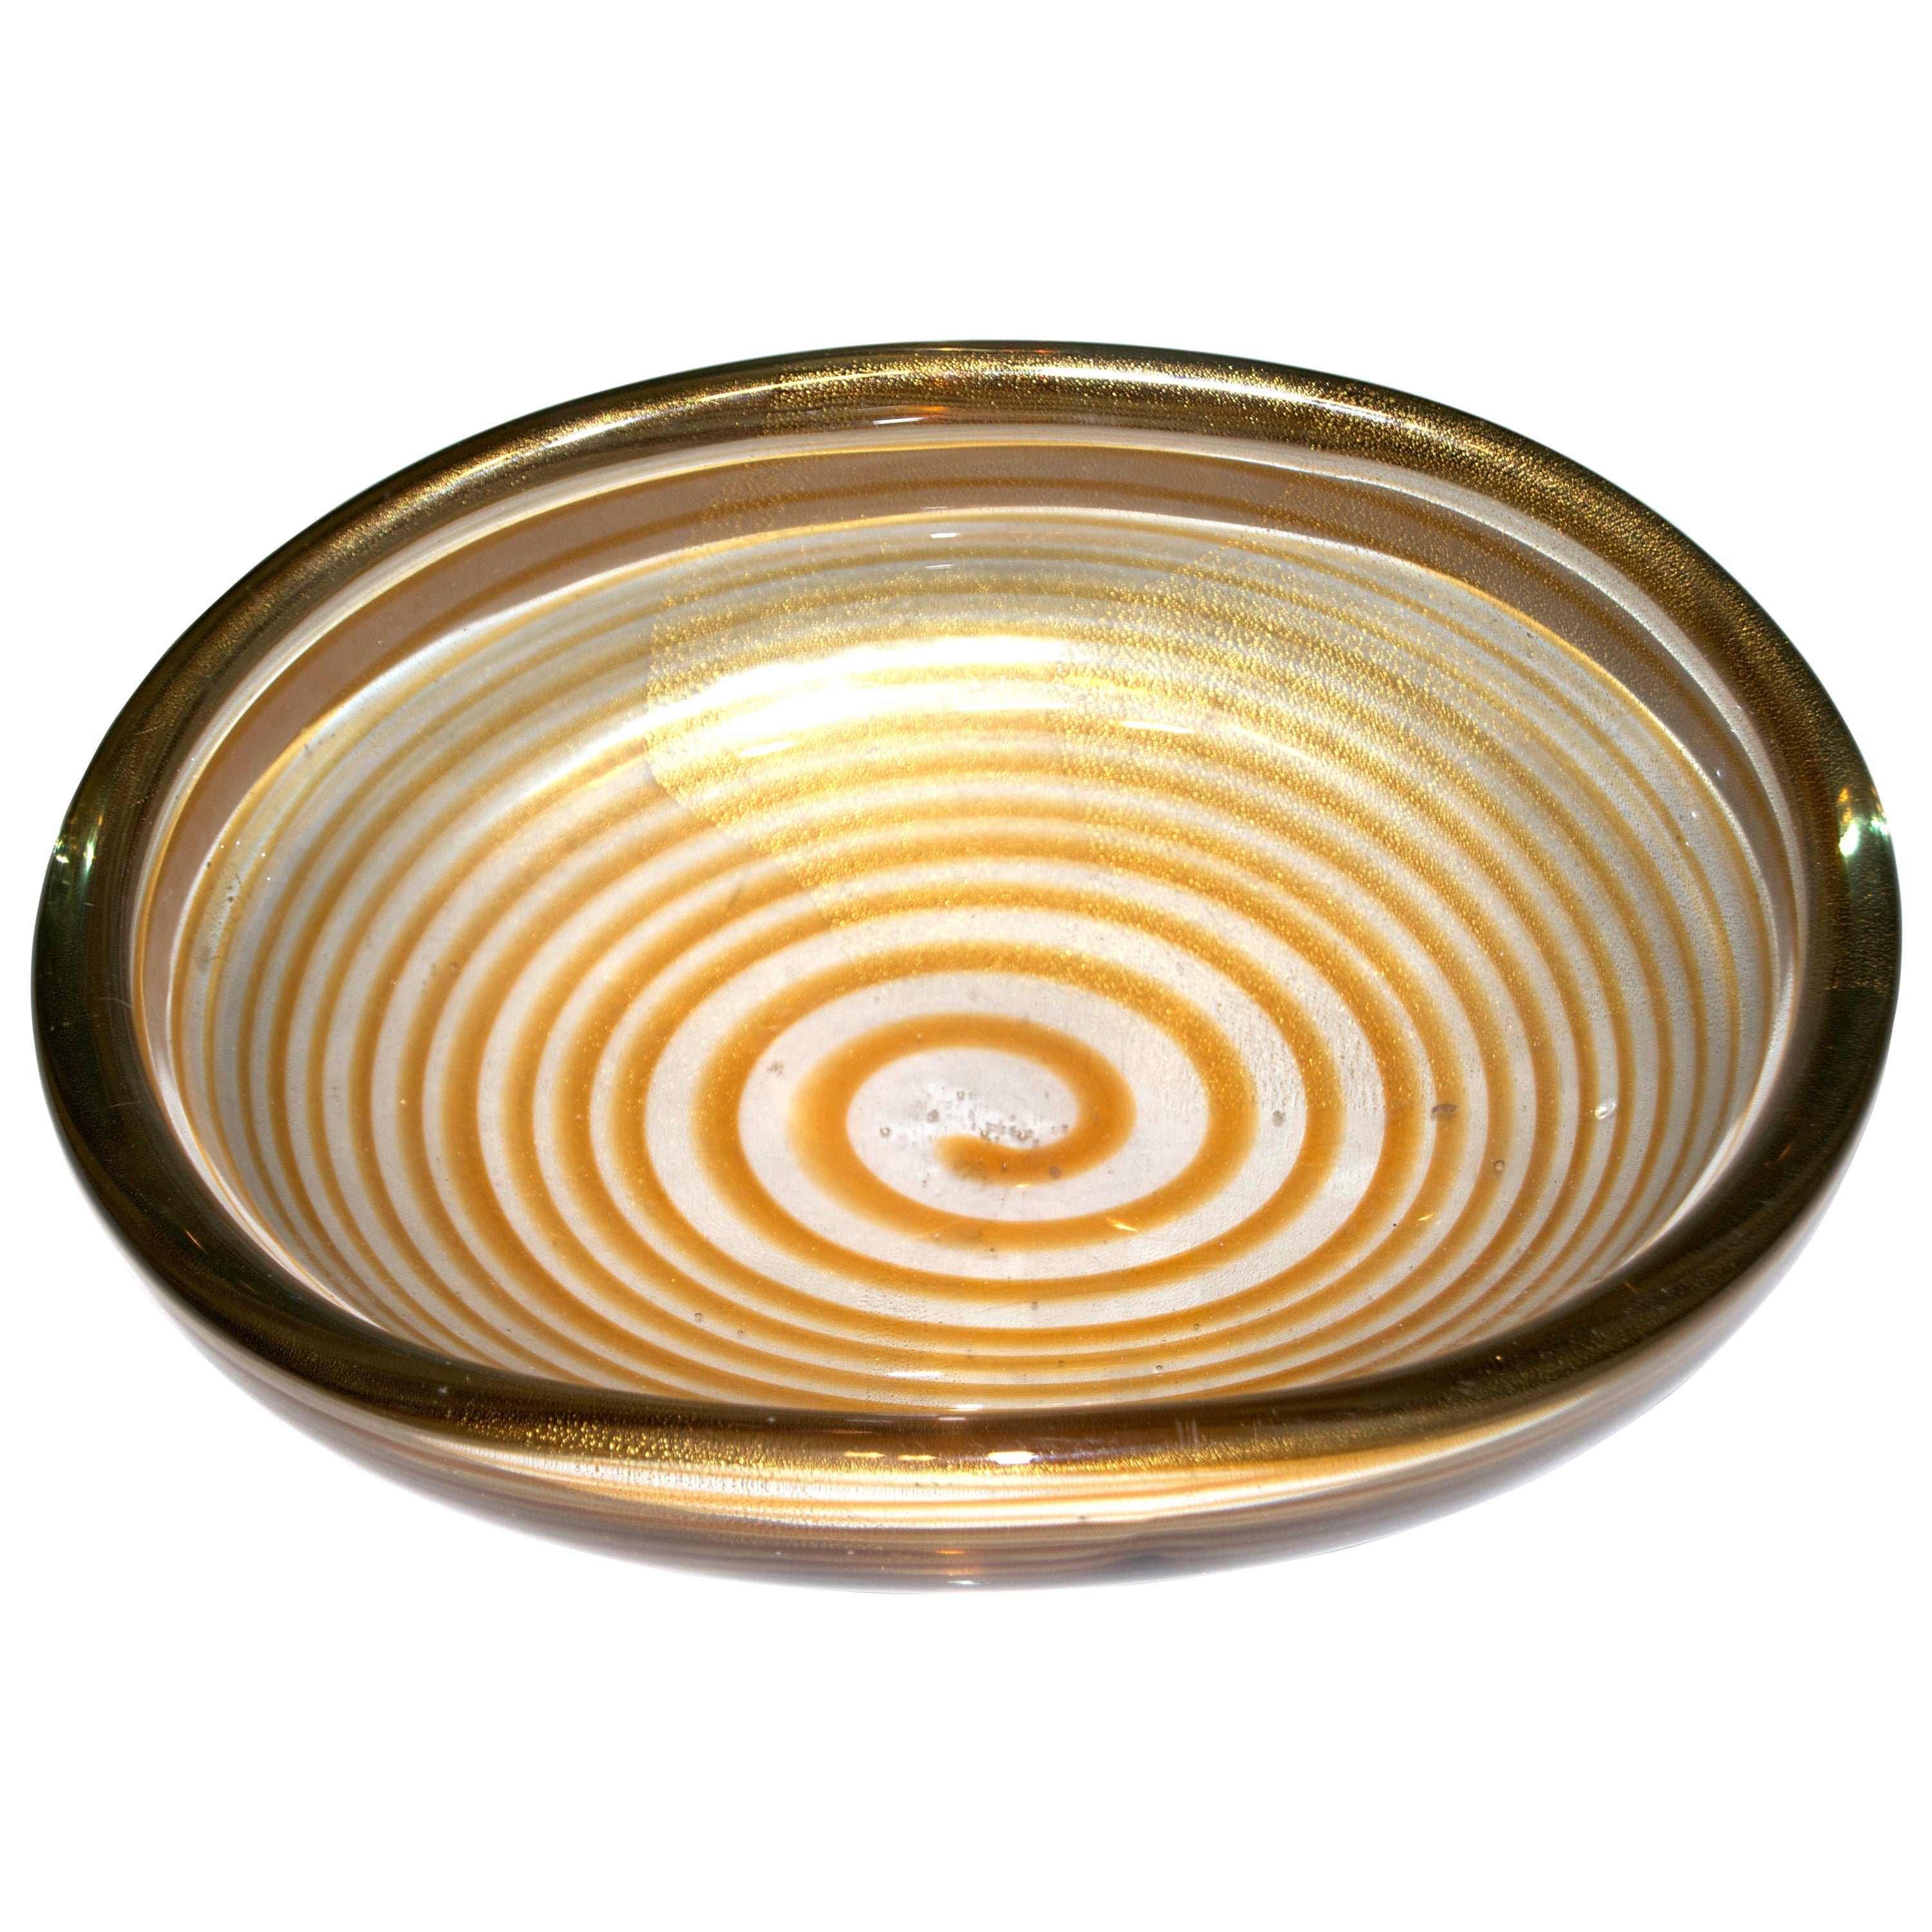 Archimede Seguso "Spirale" Centerpiece with Gold Inclusion For Sale